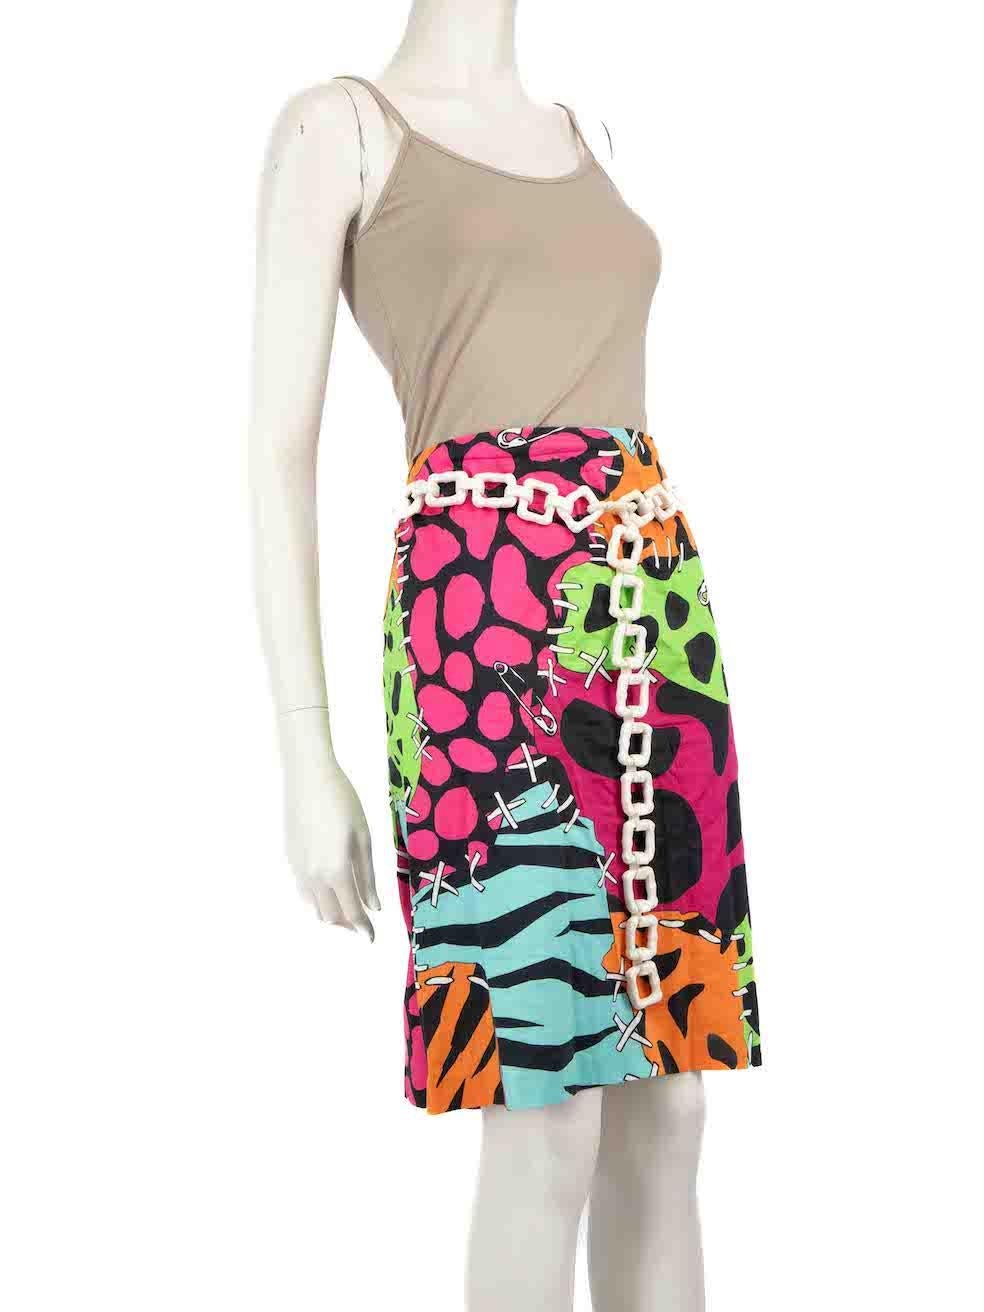 CONDITION is Very good. Minimal wear to the skirt is evident. Minimal wear to the skirt is seen on the back internal lining with discolouration marks on this used Moschino Cheap & Chic designer resale item.
 
 
 
 Details
 
 
 Multicolour
 
 Cotton
